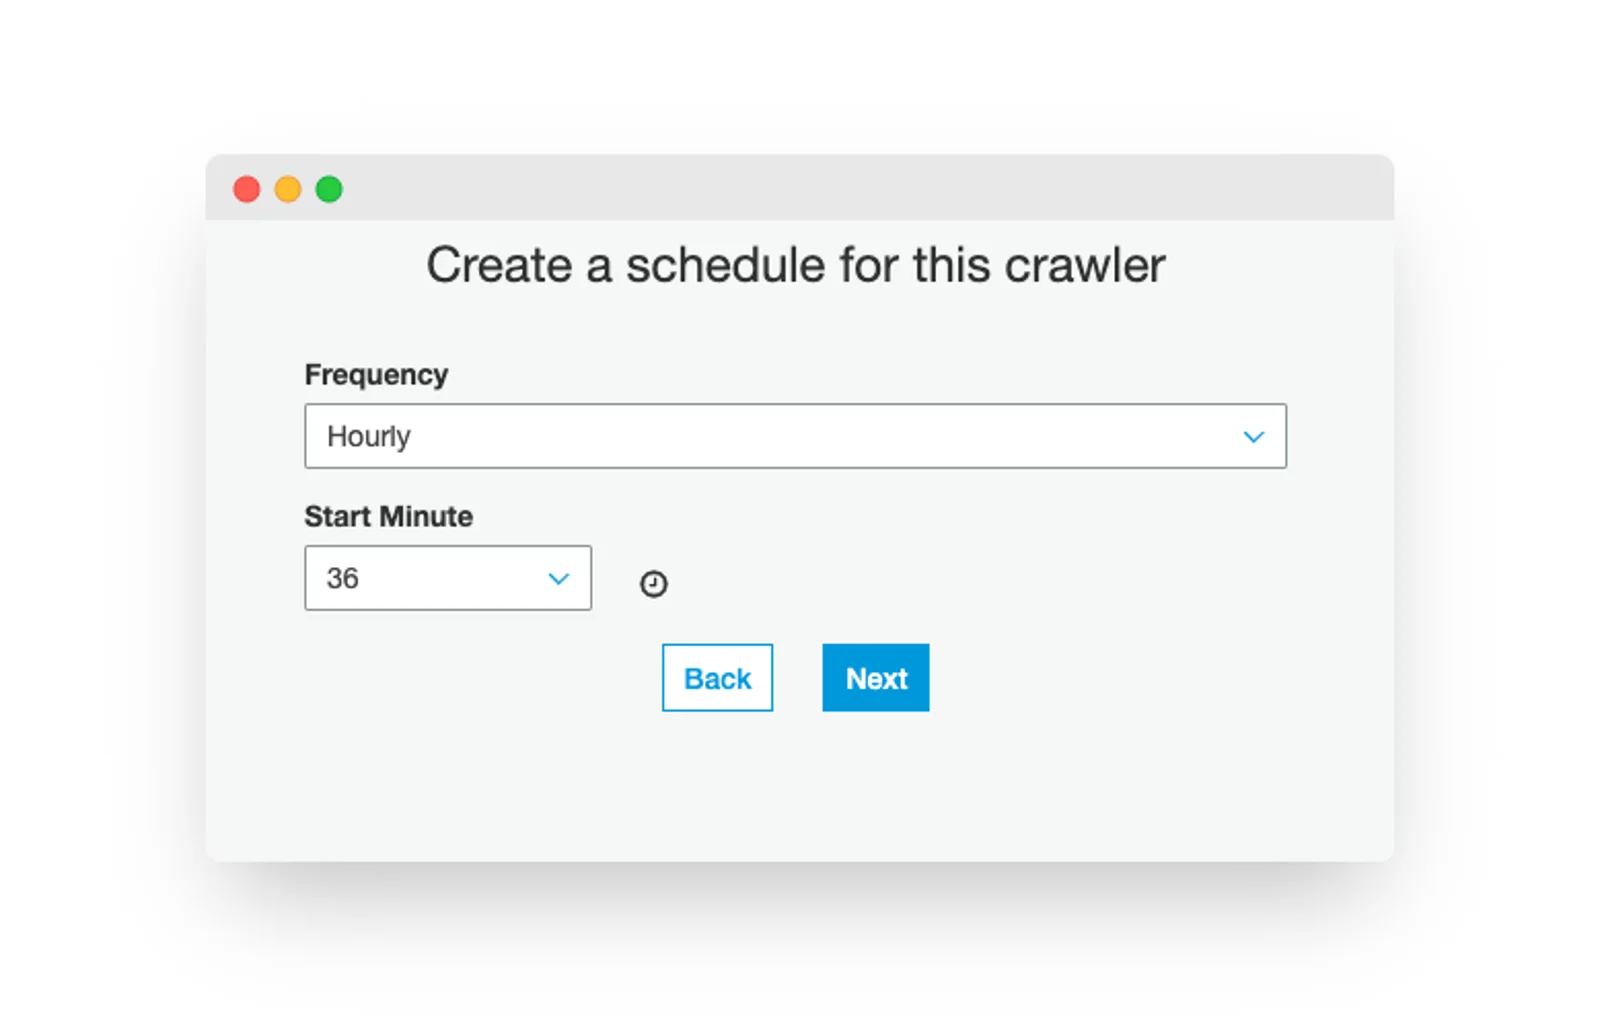 Configuring the crawler’s schedule